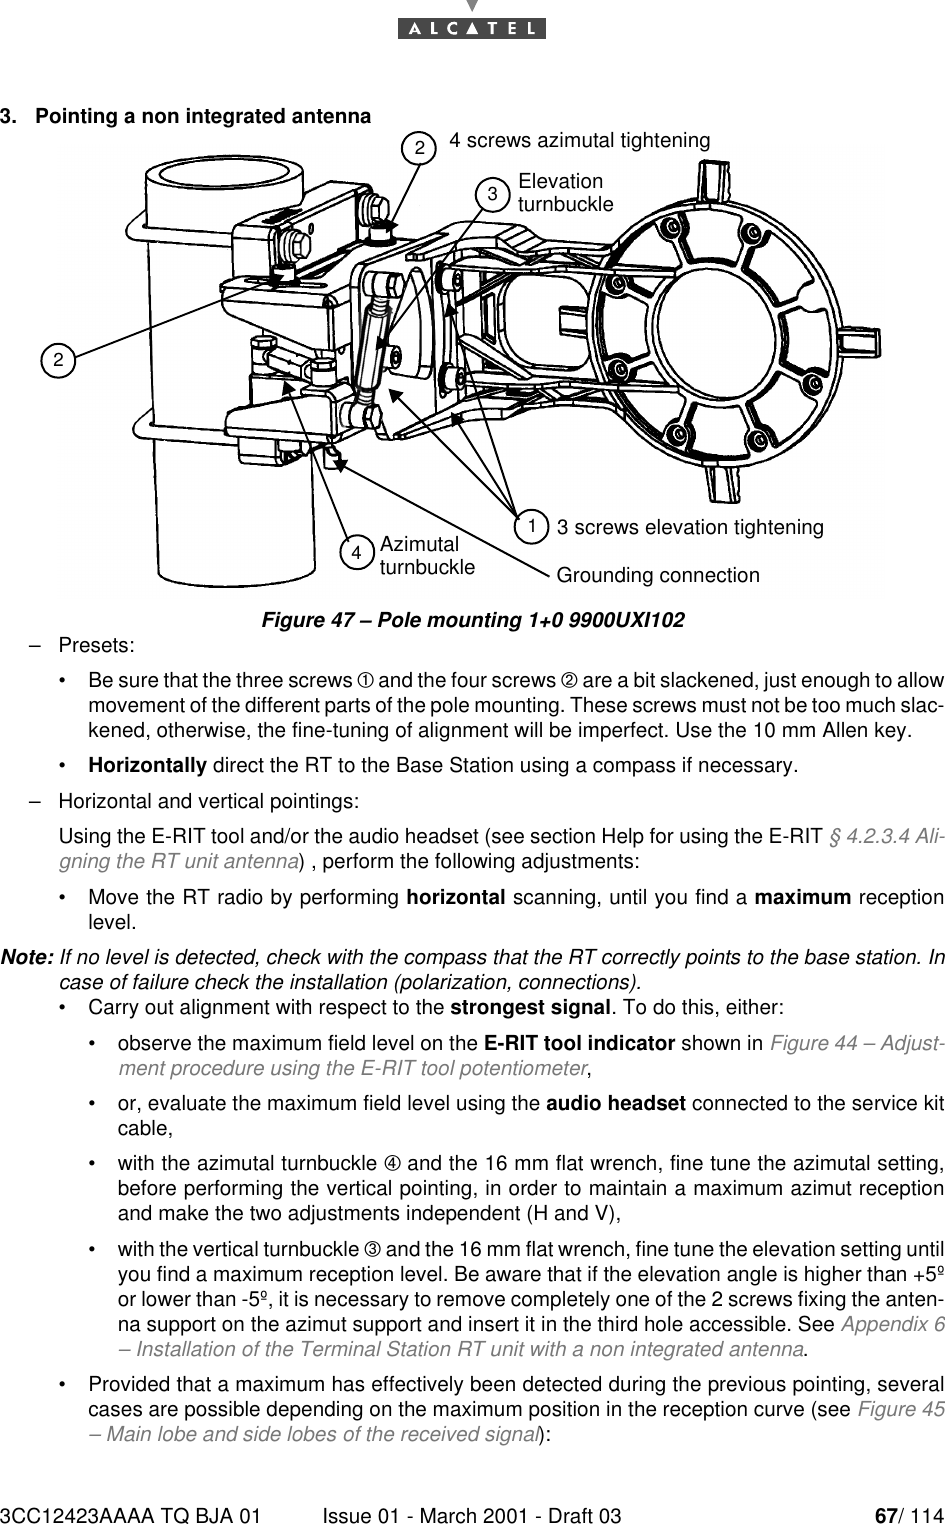 3CC12423AAAA TQ BJA 01 Issue 01 - March 2001 - Draft 03 67/ 114783. Pointing a non integrated antennaFigure 47 – Pole mounting 1+0 9900UXI102–Presets:•Be sure that the three screws ¥ and the four screws ¦ are a bit slackened, just enough to allowmovement of the different parts of the pole mounting. These screws must not be too much slac-kened, otherwise, the fine-tuning of alignment will be imperfect. Use the 10 mm Allen key.•Horizontally direct the RT to the Base Station using a compass if necessary.–Horizontal and vertical pointings:Using the E-RIT tool and/or the audio headset (see section Help for using the E-RIT § 4.2.3.4 Ali-gning the RT unit antenna) , perform the following adjustments:•Move the RT radio by performing horizontal scanning, until you find a maximum receptionlevel.Note: If no level is detected, check with the compass that the RT correctly points to the base station. Incase of failure check the installation (polarization, connections).•Carry out alignment with respect to the strongest signal. To do this, either:•observe the maximum field level on the E-RIT tool indicator shown in Figure 44 – Adjust-ment procedure using the E-RIT tool potentiometer,•or, evaluate the maximum field level using the audio headset connected to the service kitcable,•with the azimutal turnbuckle ¨ and the 16 mm flat wrench, fine tune the azimutal setting,before performing the vertical pointing, in order to maintain a maximum azimut receptionand make the two adjustments independent (H and V),•with the vertical turnbuckle § and the 16 mm flat wrench, fine tune the elevation setting untilyou find a maximum reception level. Be aware that if the elevation angle is higher than +5ºor lower than -5º, it is necessary to remove completely one of the 2 screws fixing the anten-na support on the azimut support and insert it in the third hole accessible. See Appendix 6– Installation of the Terminal Station RT unit with a non integrated antenna.•Provided that a maximum has effectively been detected during the previous pointing, severalcases are possible depending on the maximum position in the reception curve (see Figure 45– Main lobe and side lobes of the received signal):AzimutalElevationGrounding connection3 screws elevation tightening124324 screws azimutal tighteningturnbuckleturnbuckle